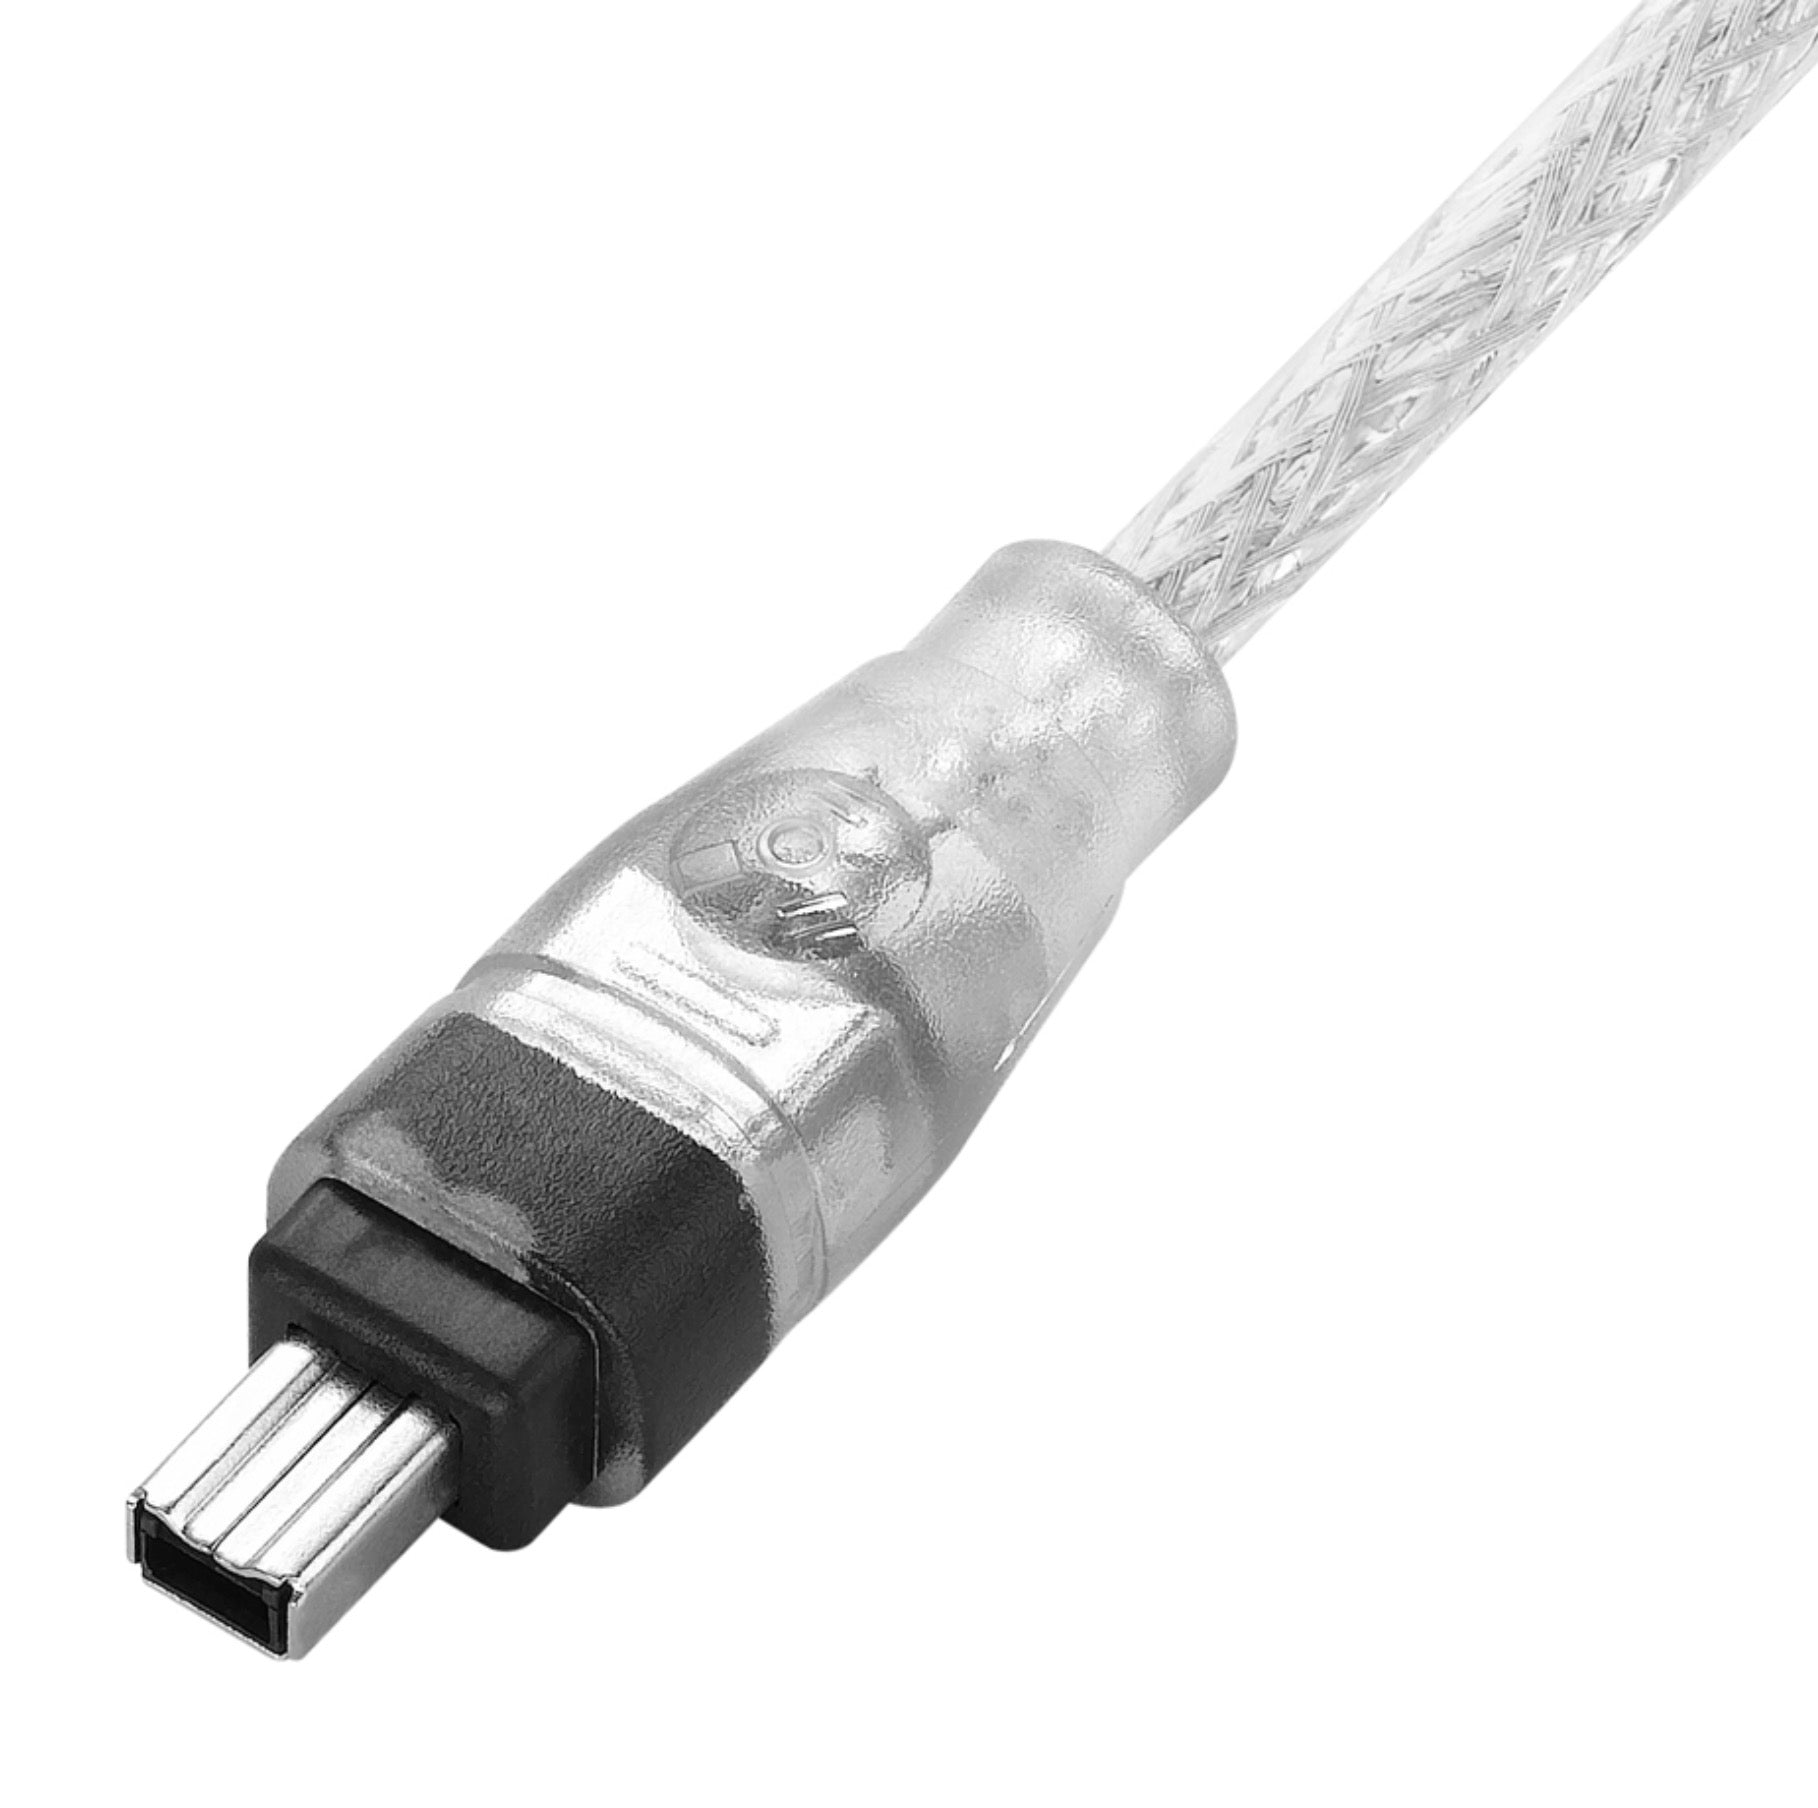 USB 2.0 A Male to 4Pin Firewire IEEE1394 Male Cable 1.5m